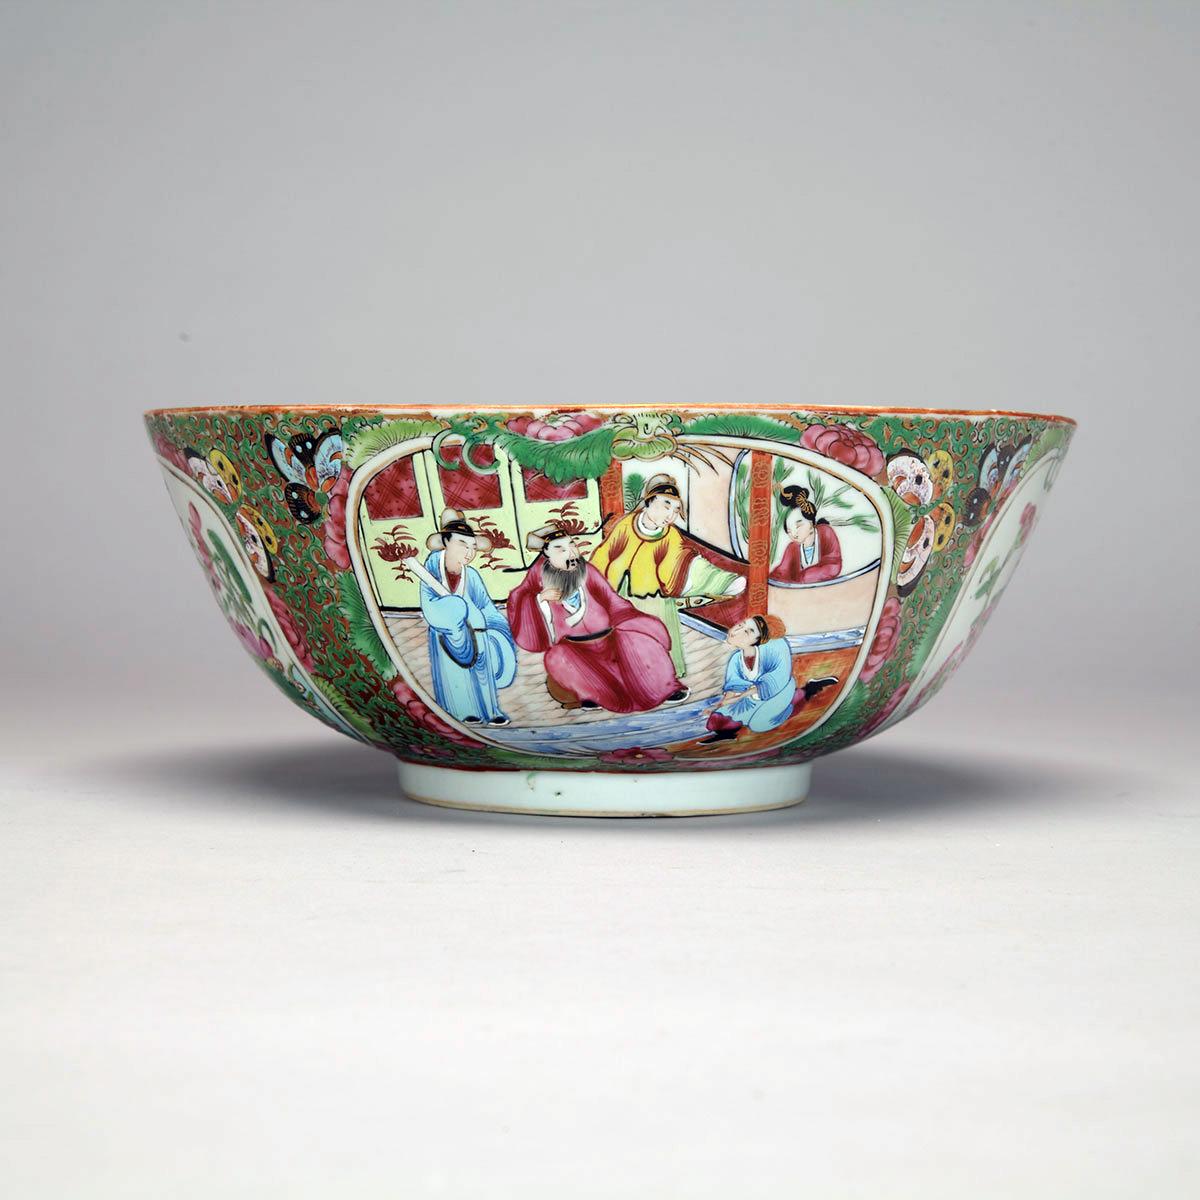 Export Canton Rose Punch Bowl, 19th Century 